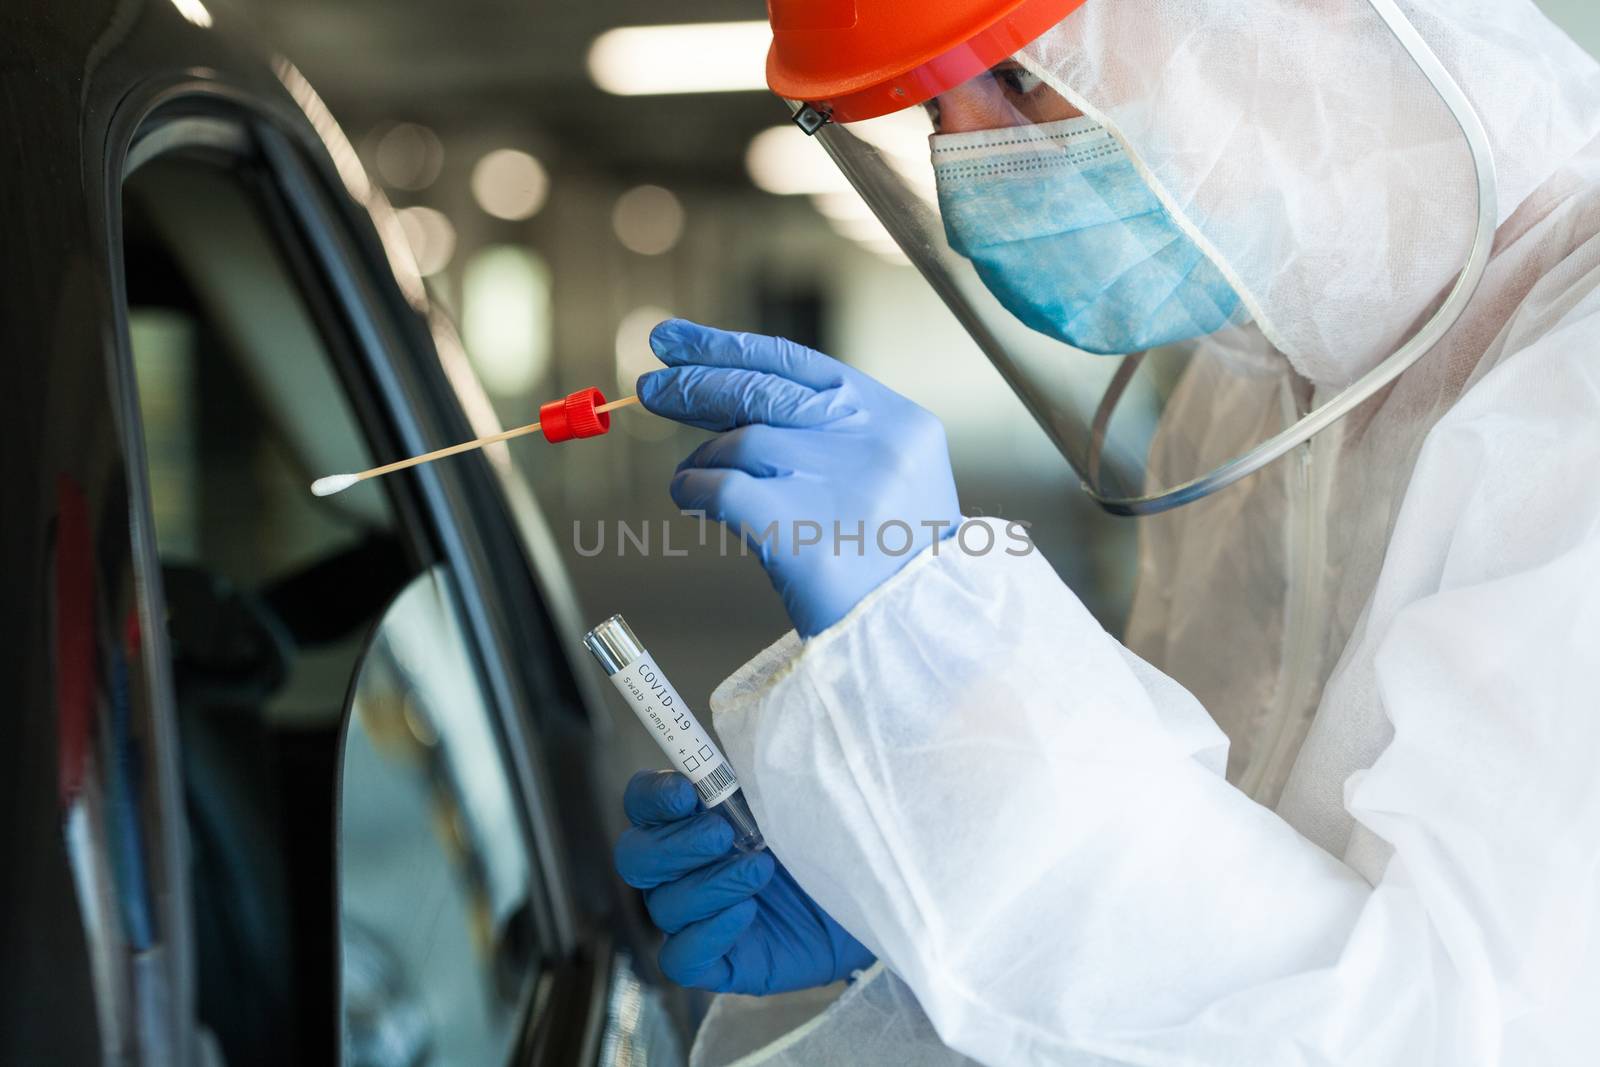 Medical NHS worker in personal protective equipment swabbing a person in a car drive through Coronavirus COVID-19 mobile testing center,oral and nasal specimen collection procedure,health and safety 